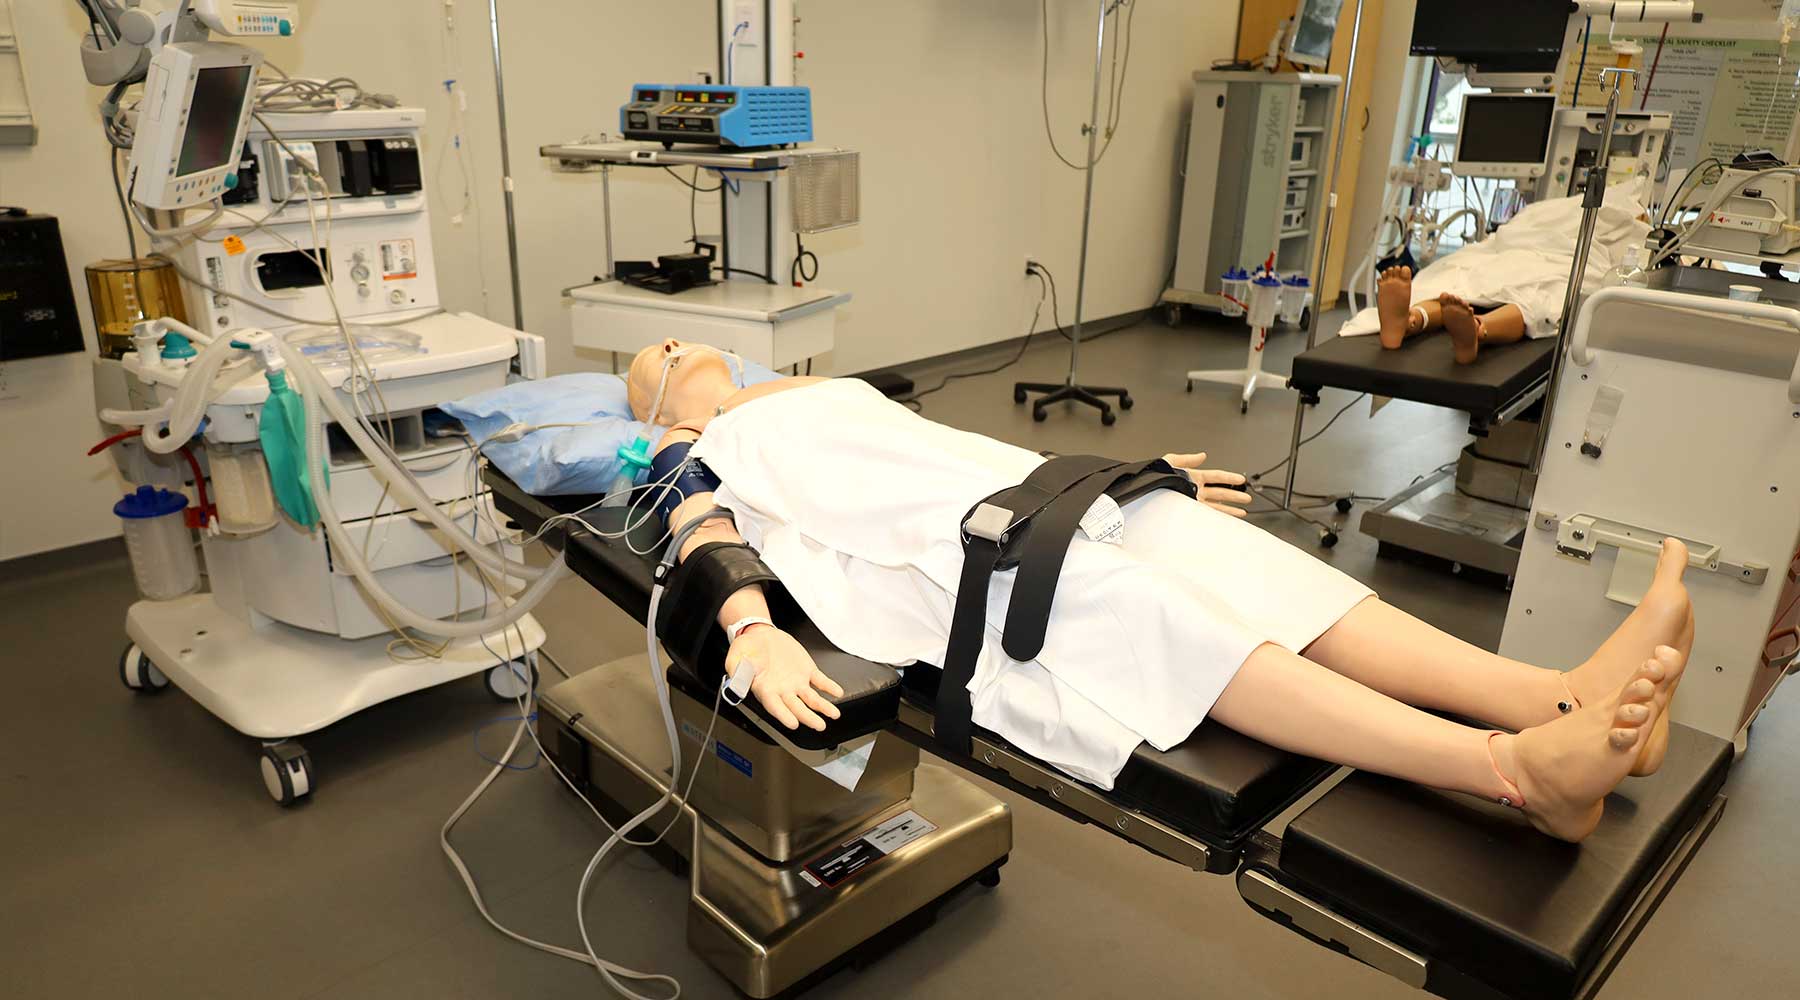 BCIT health sciences simulation operating room and equipment